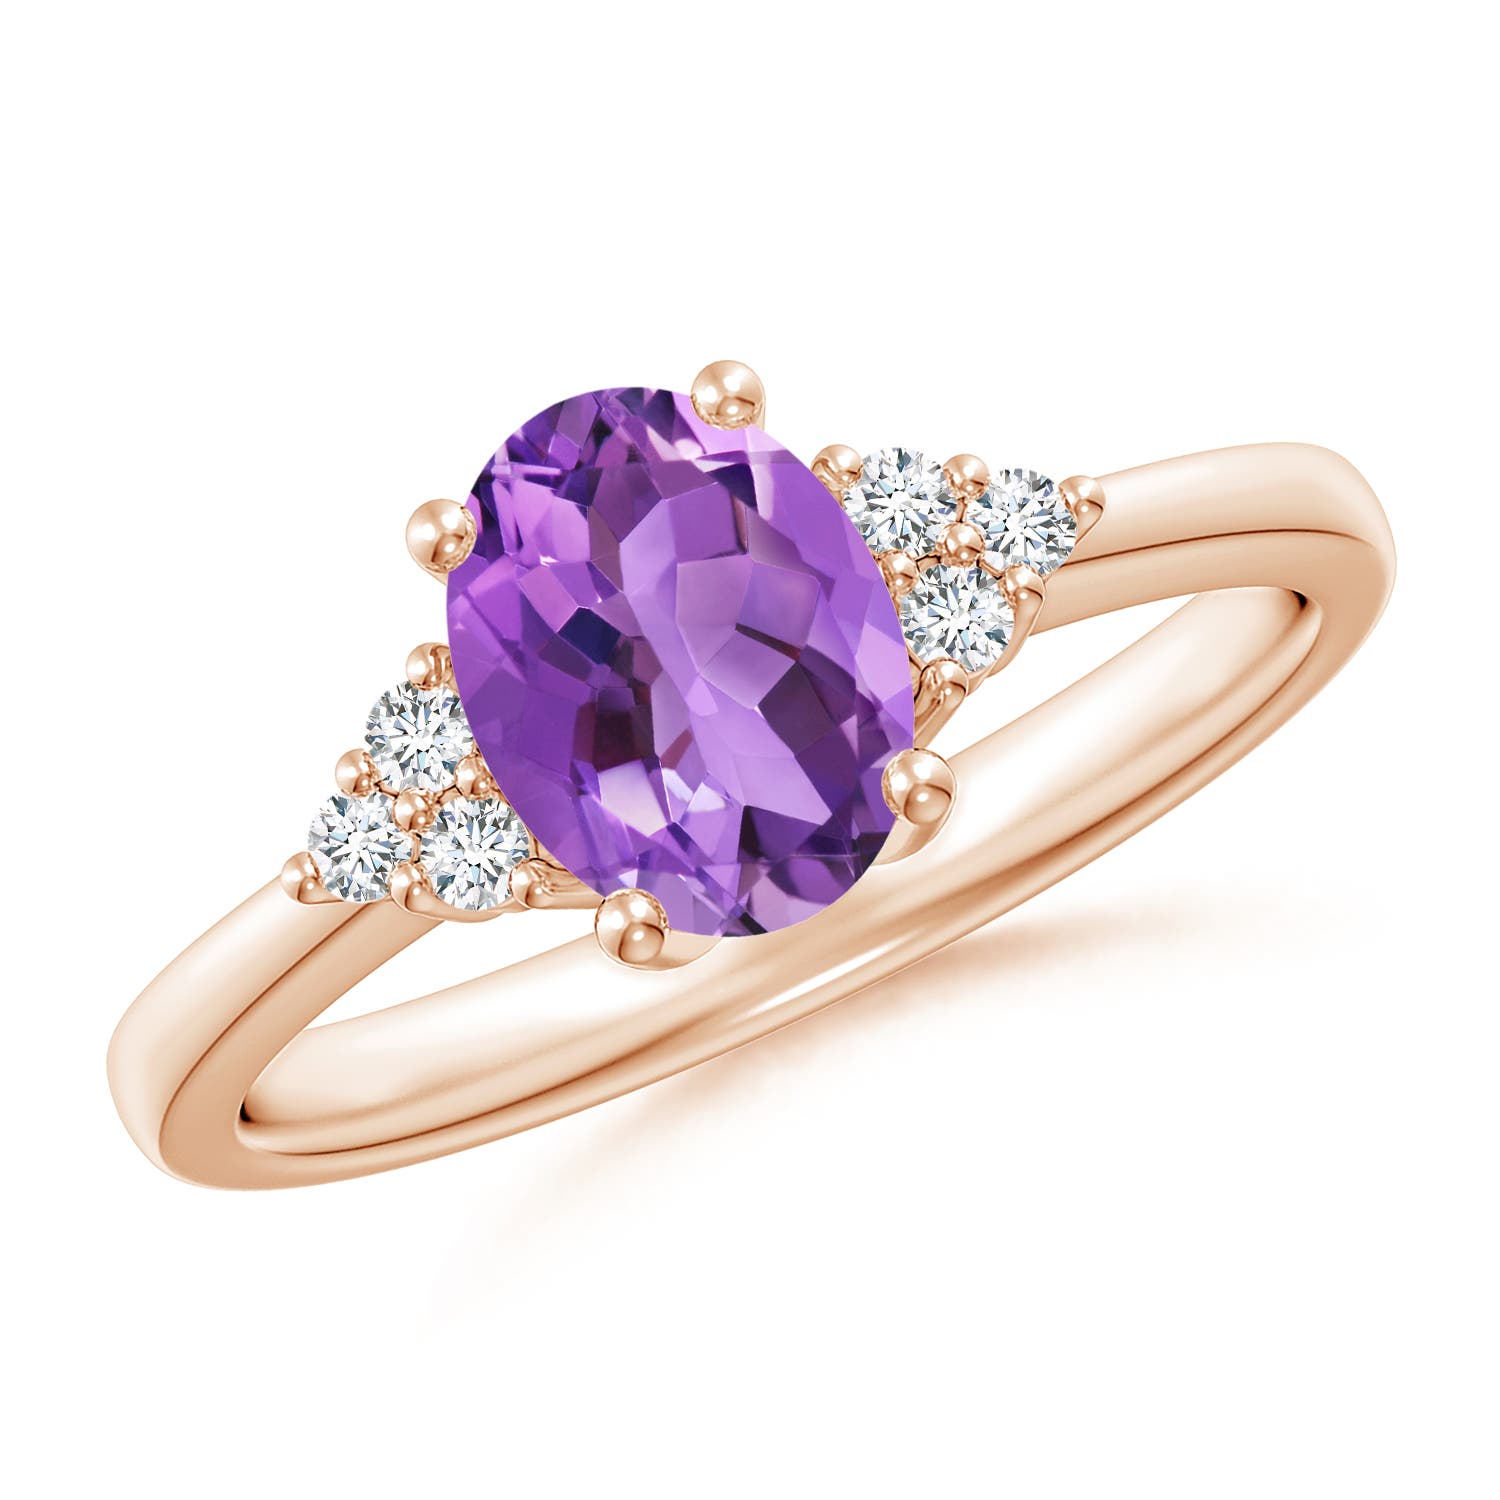 AA - Amethyst / 1.26 CT / 14 KT Rose Gold